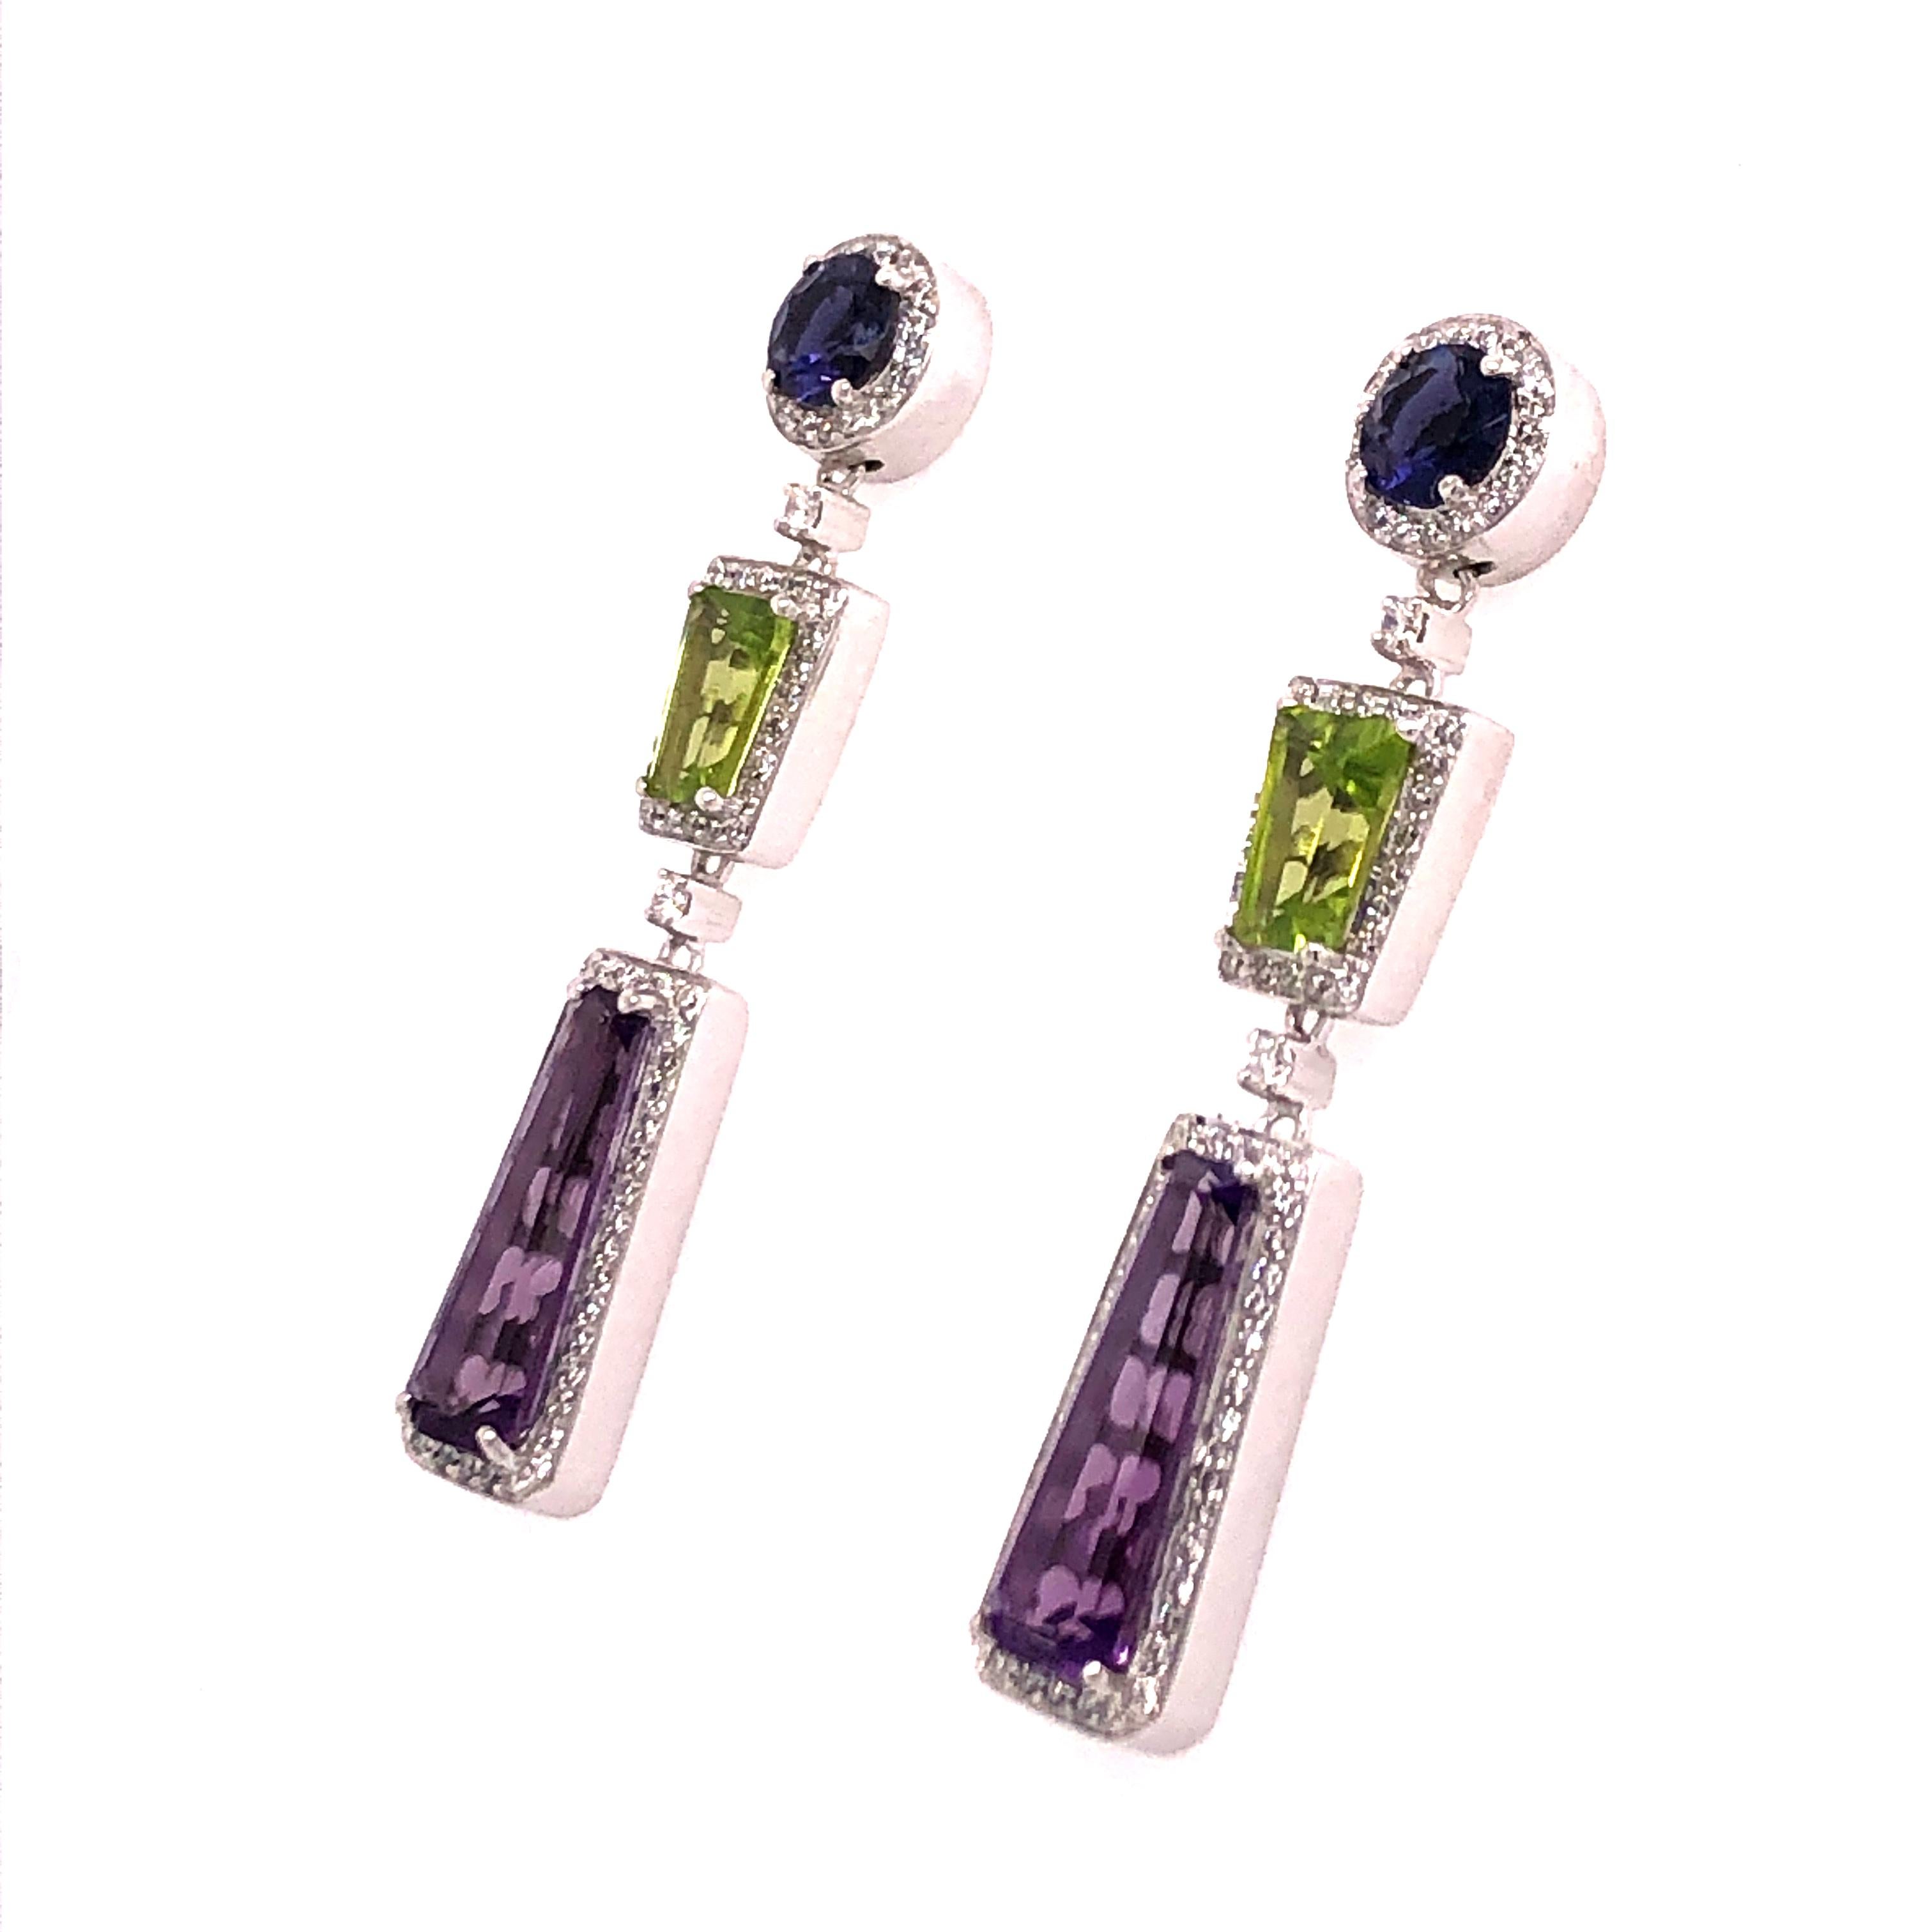 Modern White Gold Multicolored Stone and Diamond Earrings